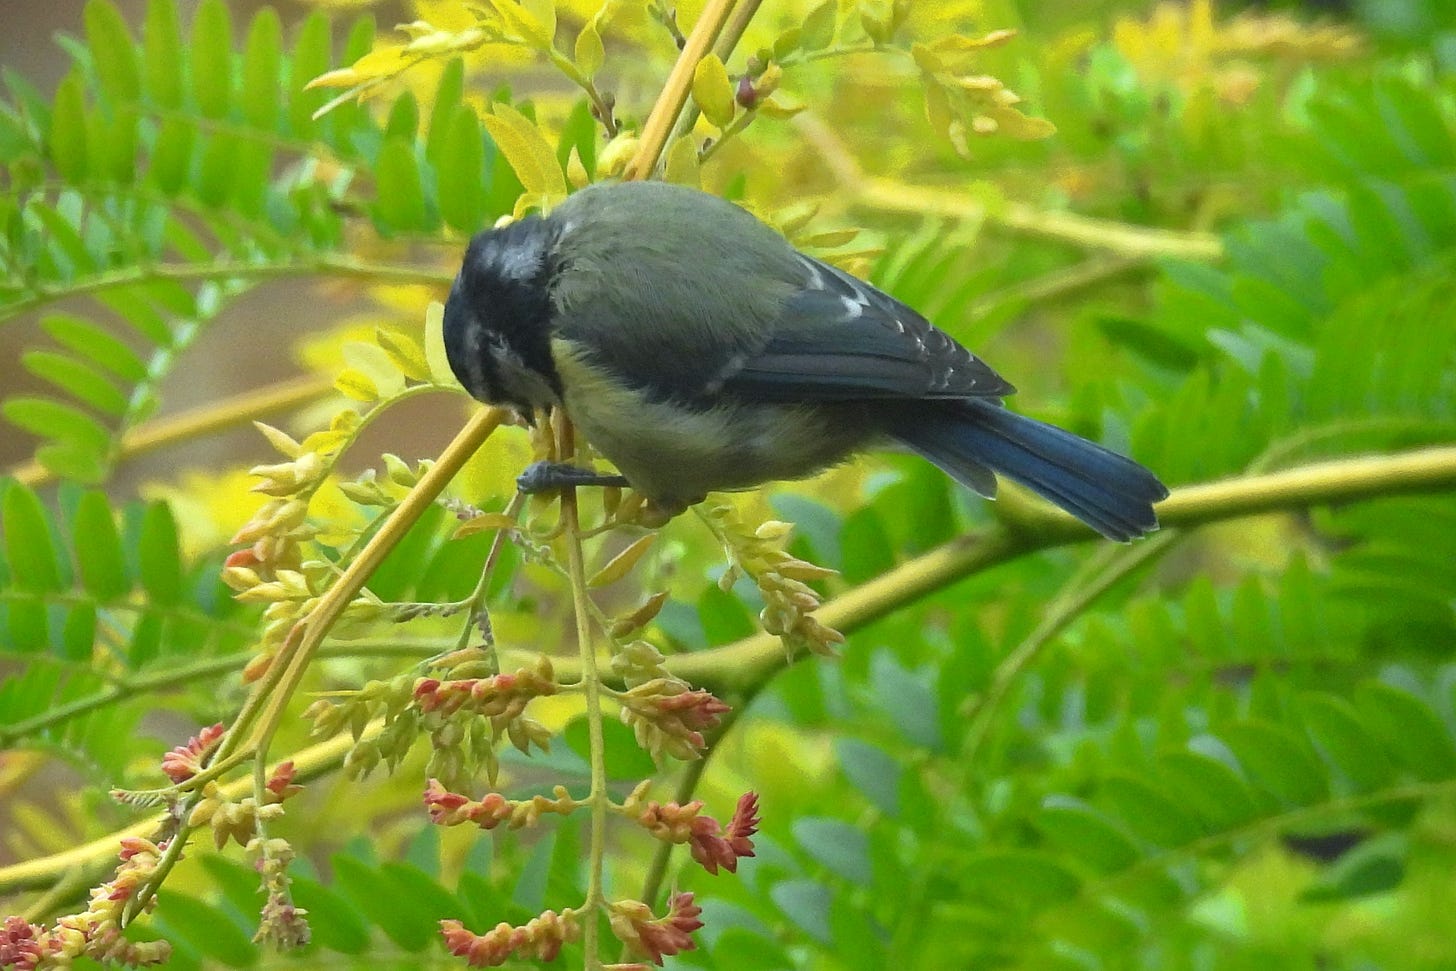 Side view of a Blue Tit as it eats seeds on a Honey Locust tree. Background of bright green leaves and pinkish flower buds in the lower left of image